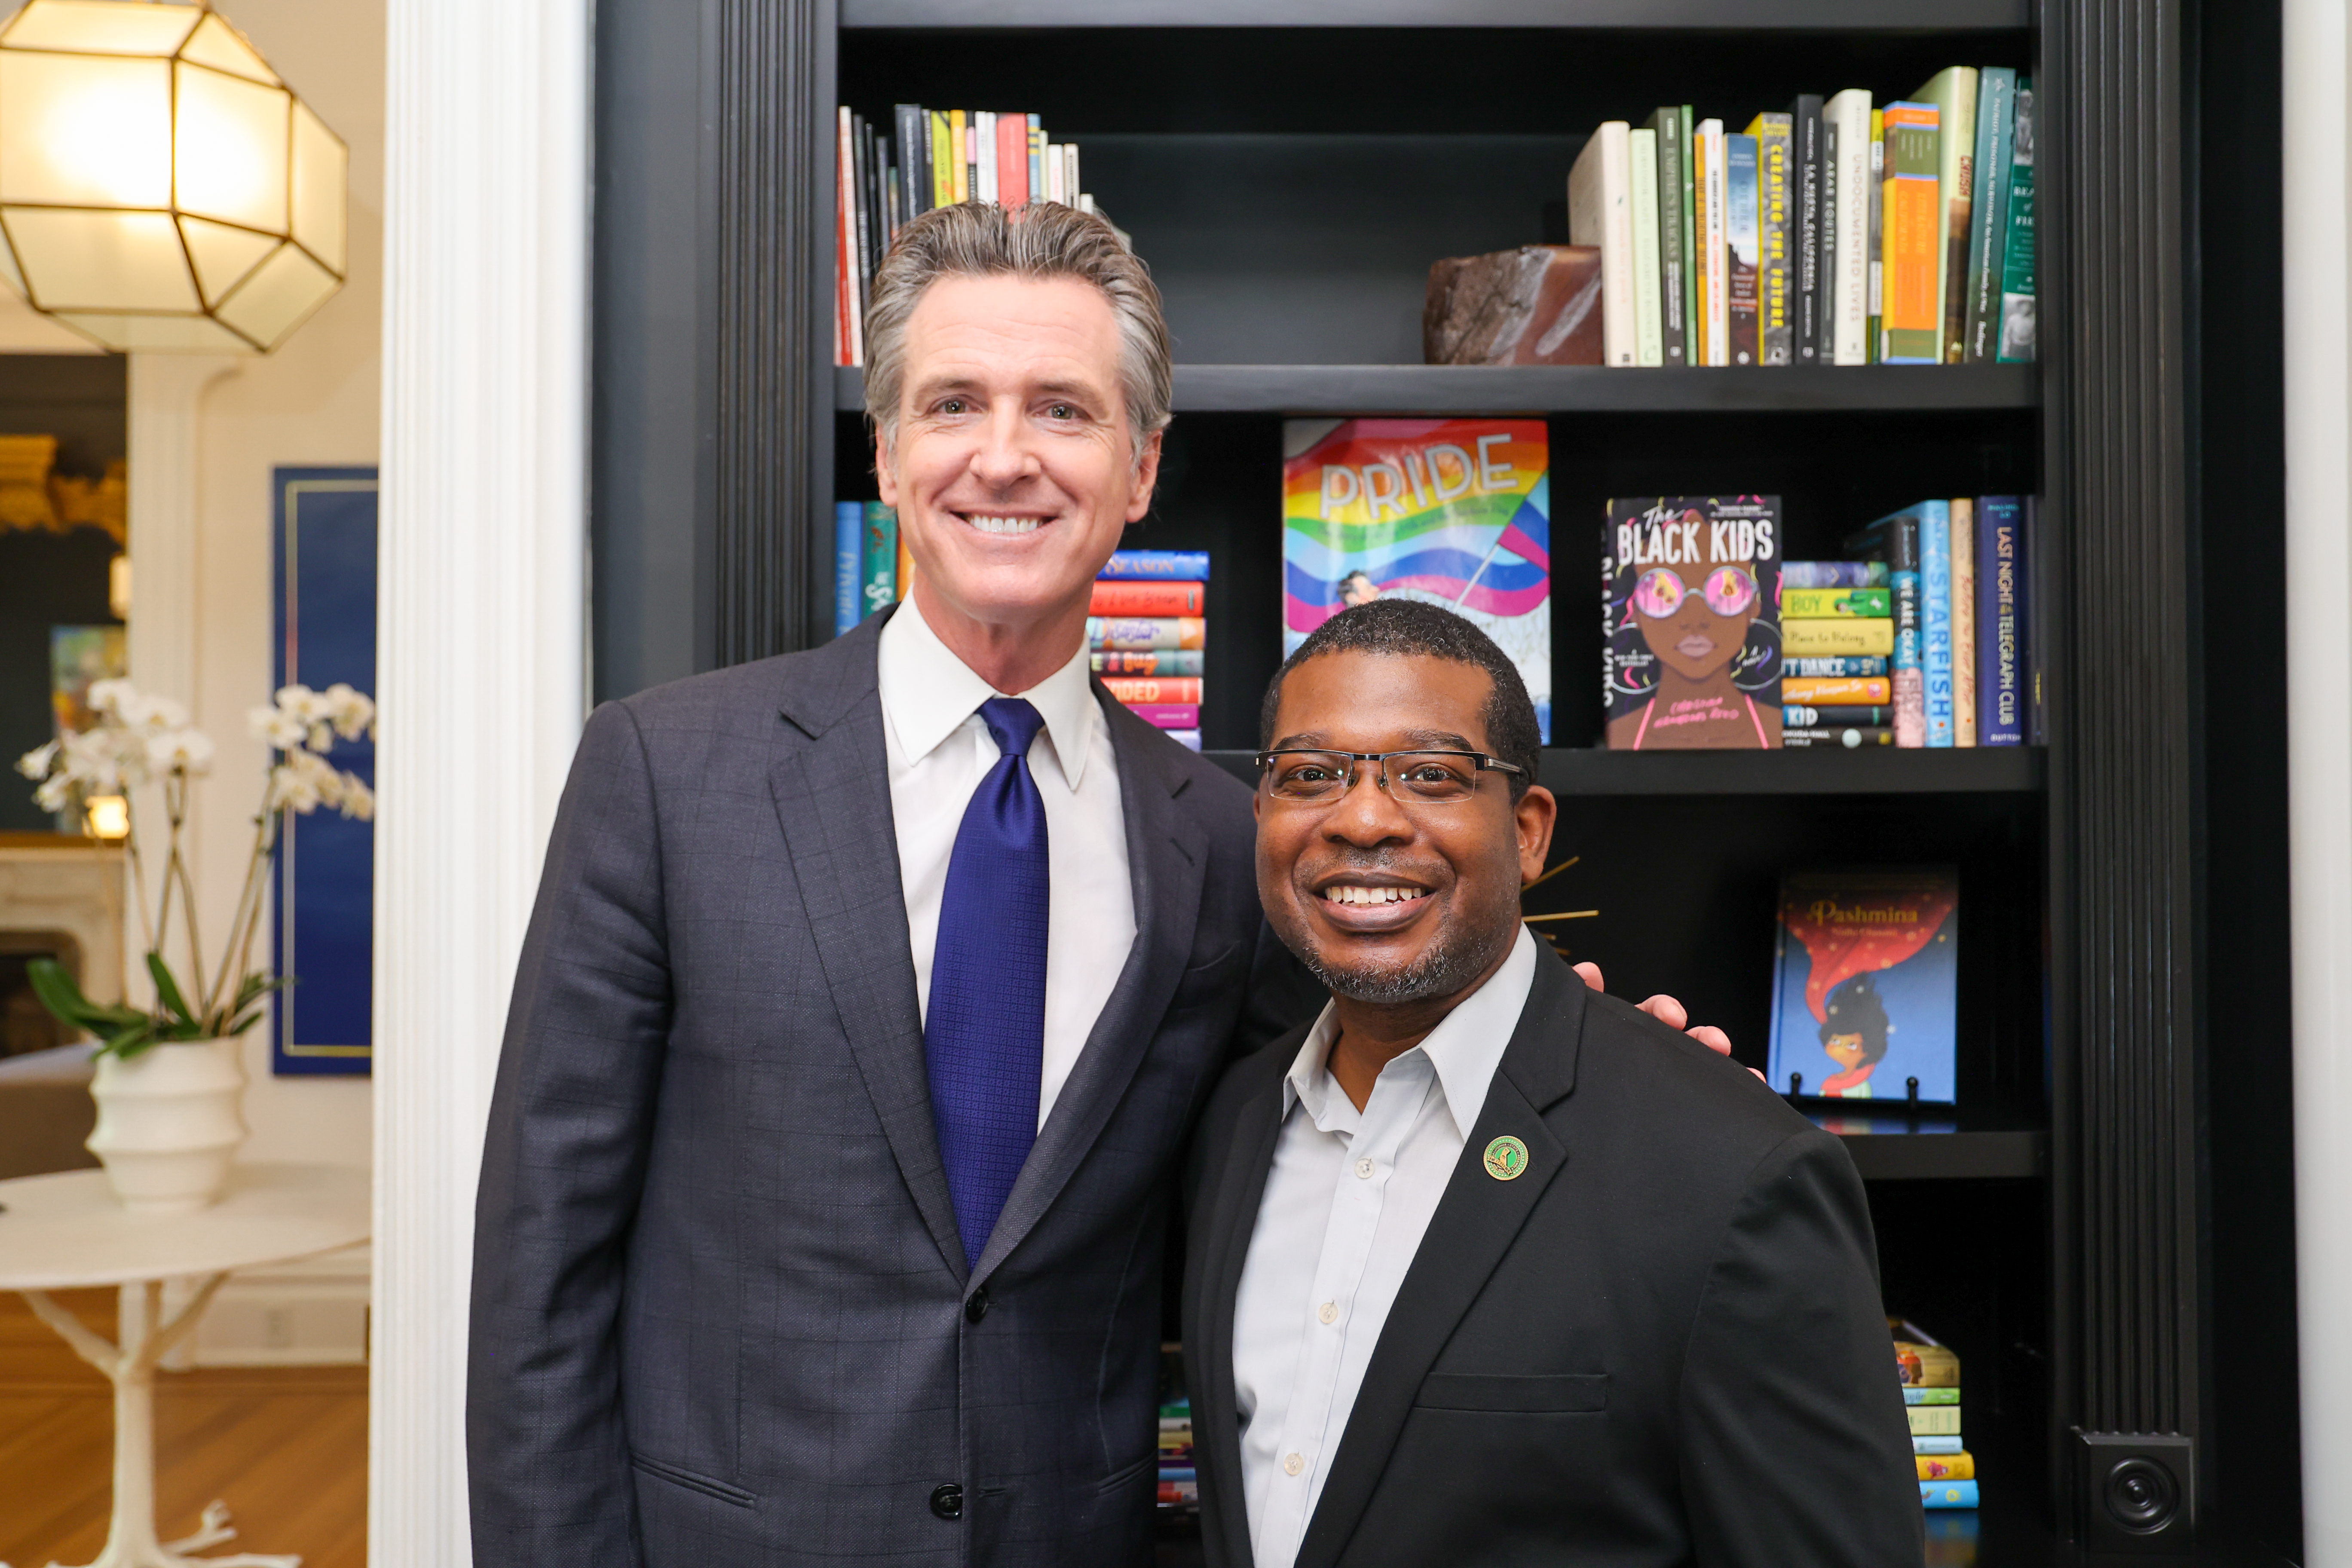 Assemblymember Dr. Corey Jackson at bill signing with Governor Newsom on AB 1078